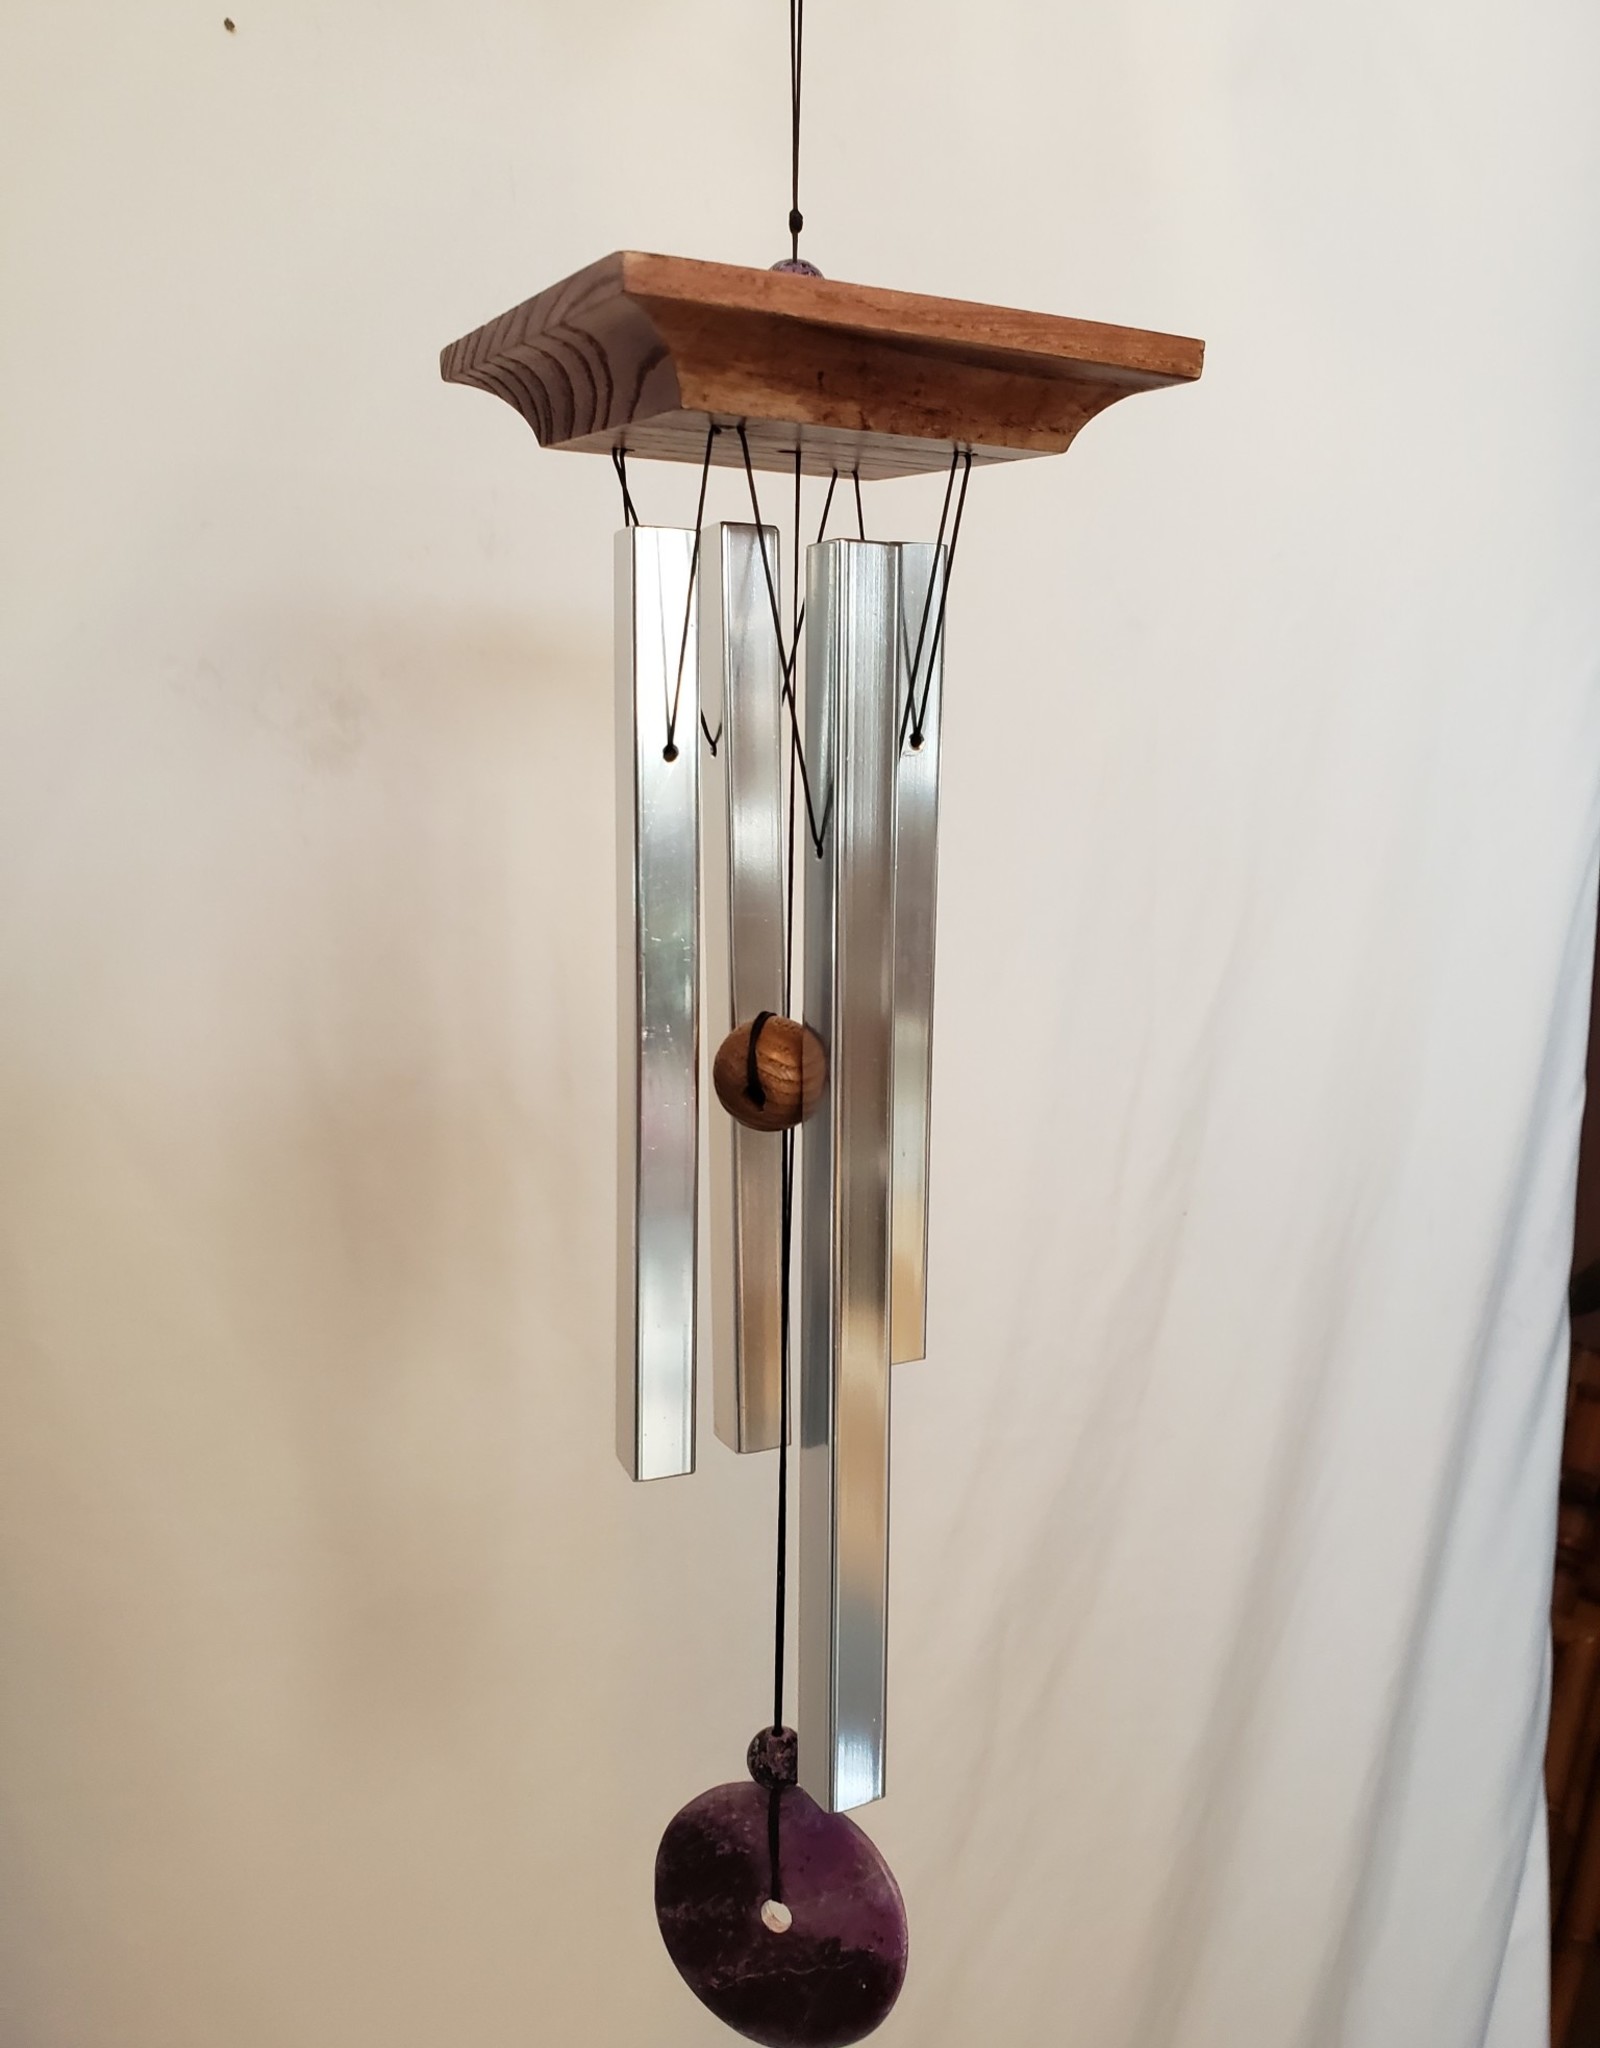 Woodstock Amethyst Chime - Small